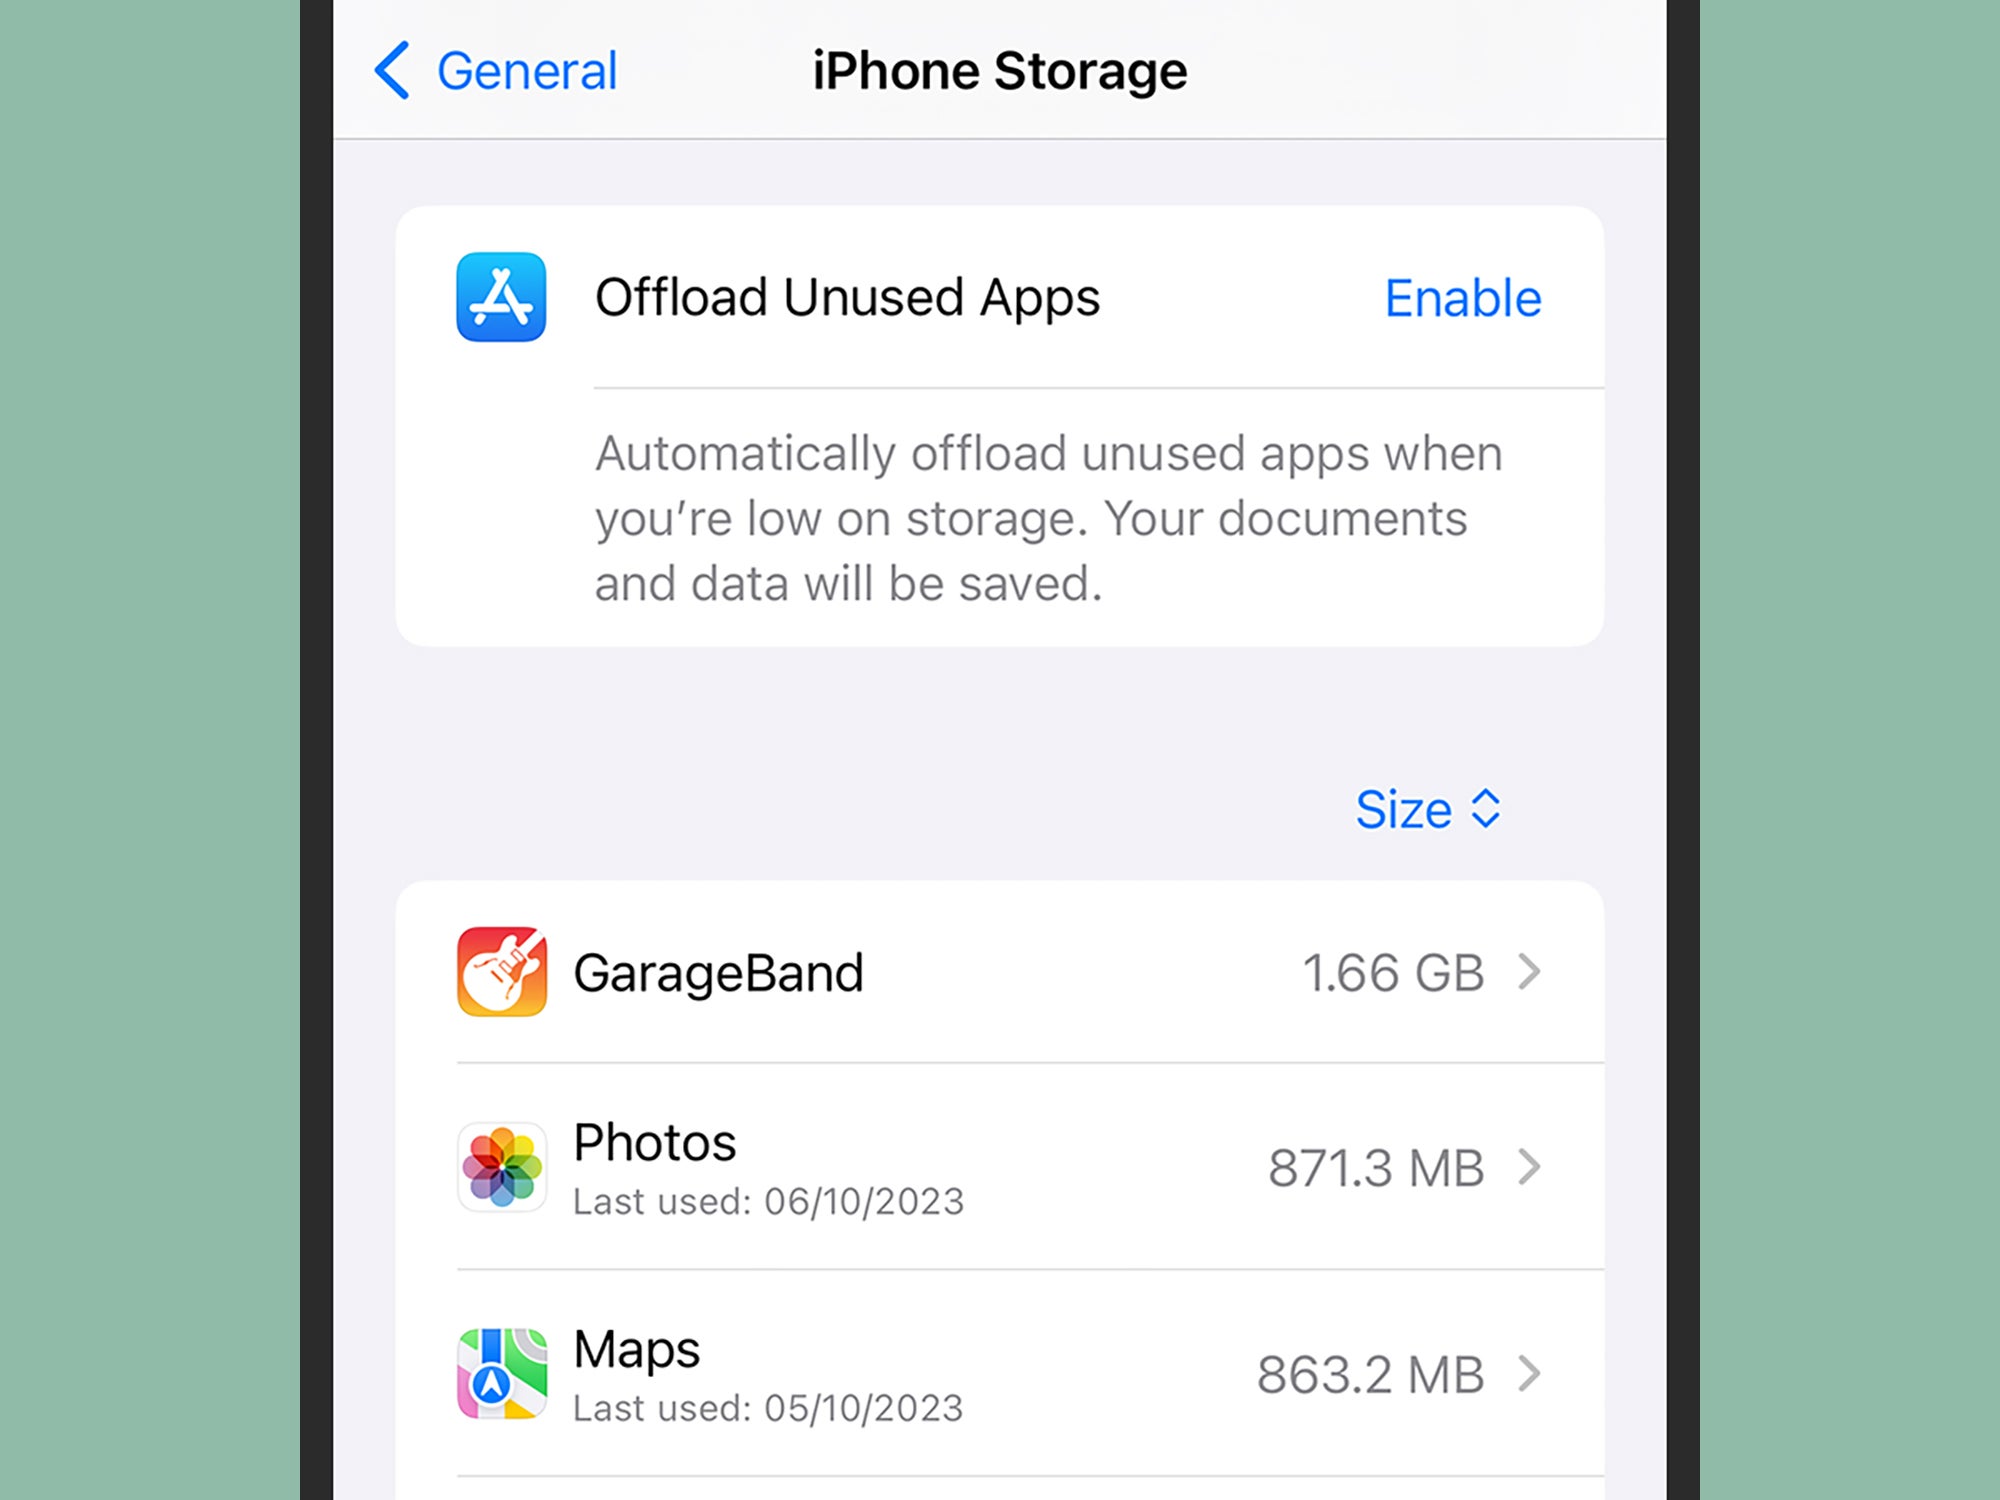 The iOS Settings app, showing the iPhone Storage screen and the option to offload unused apps.